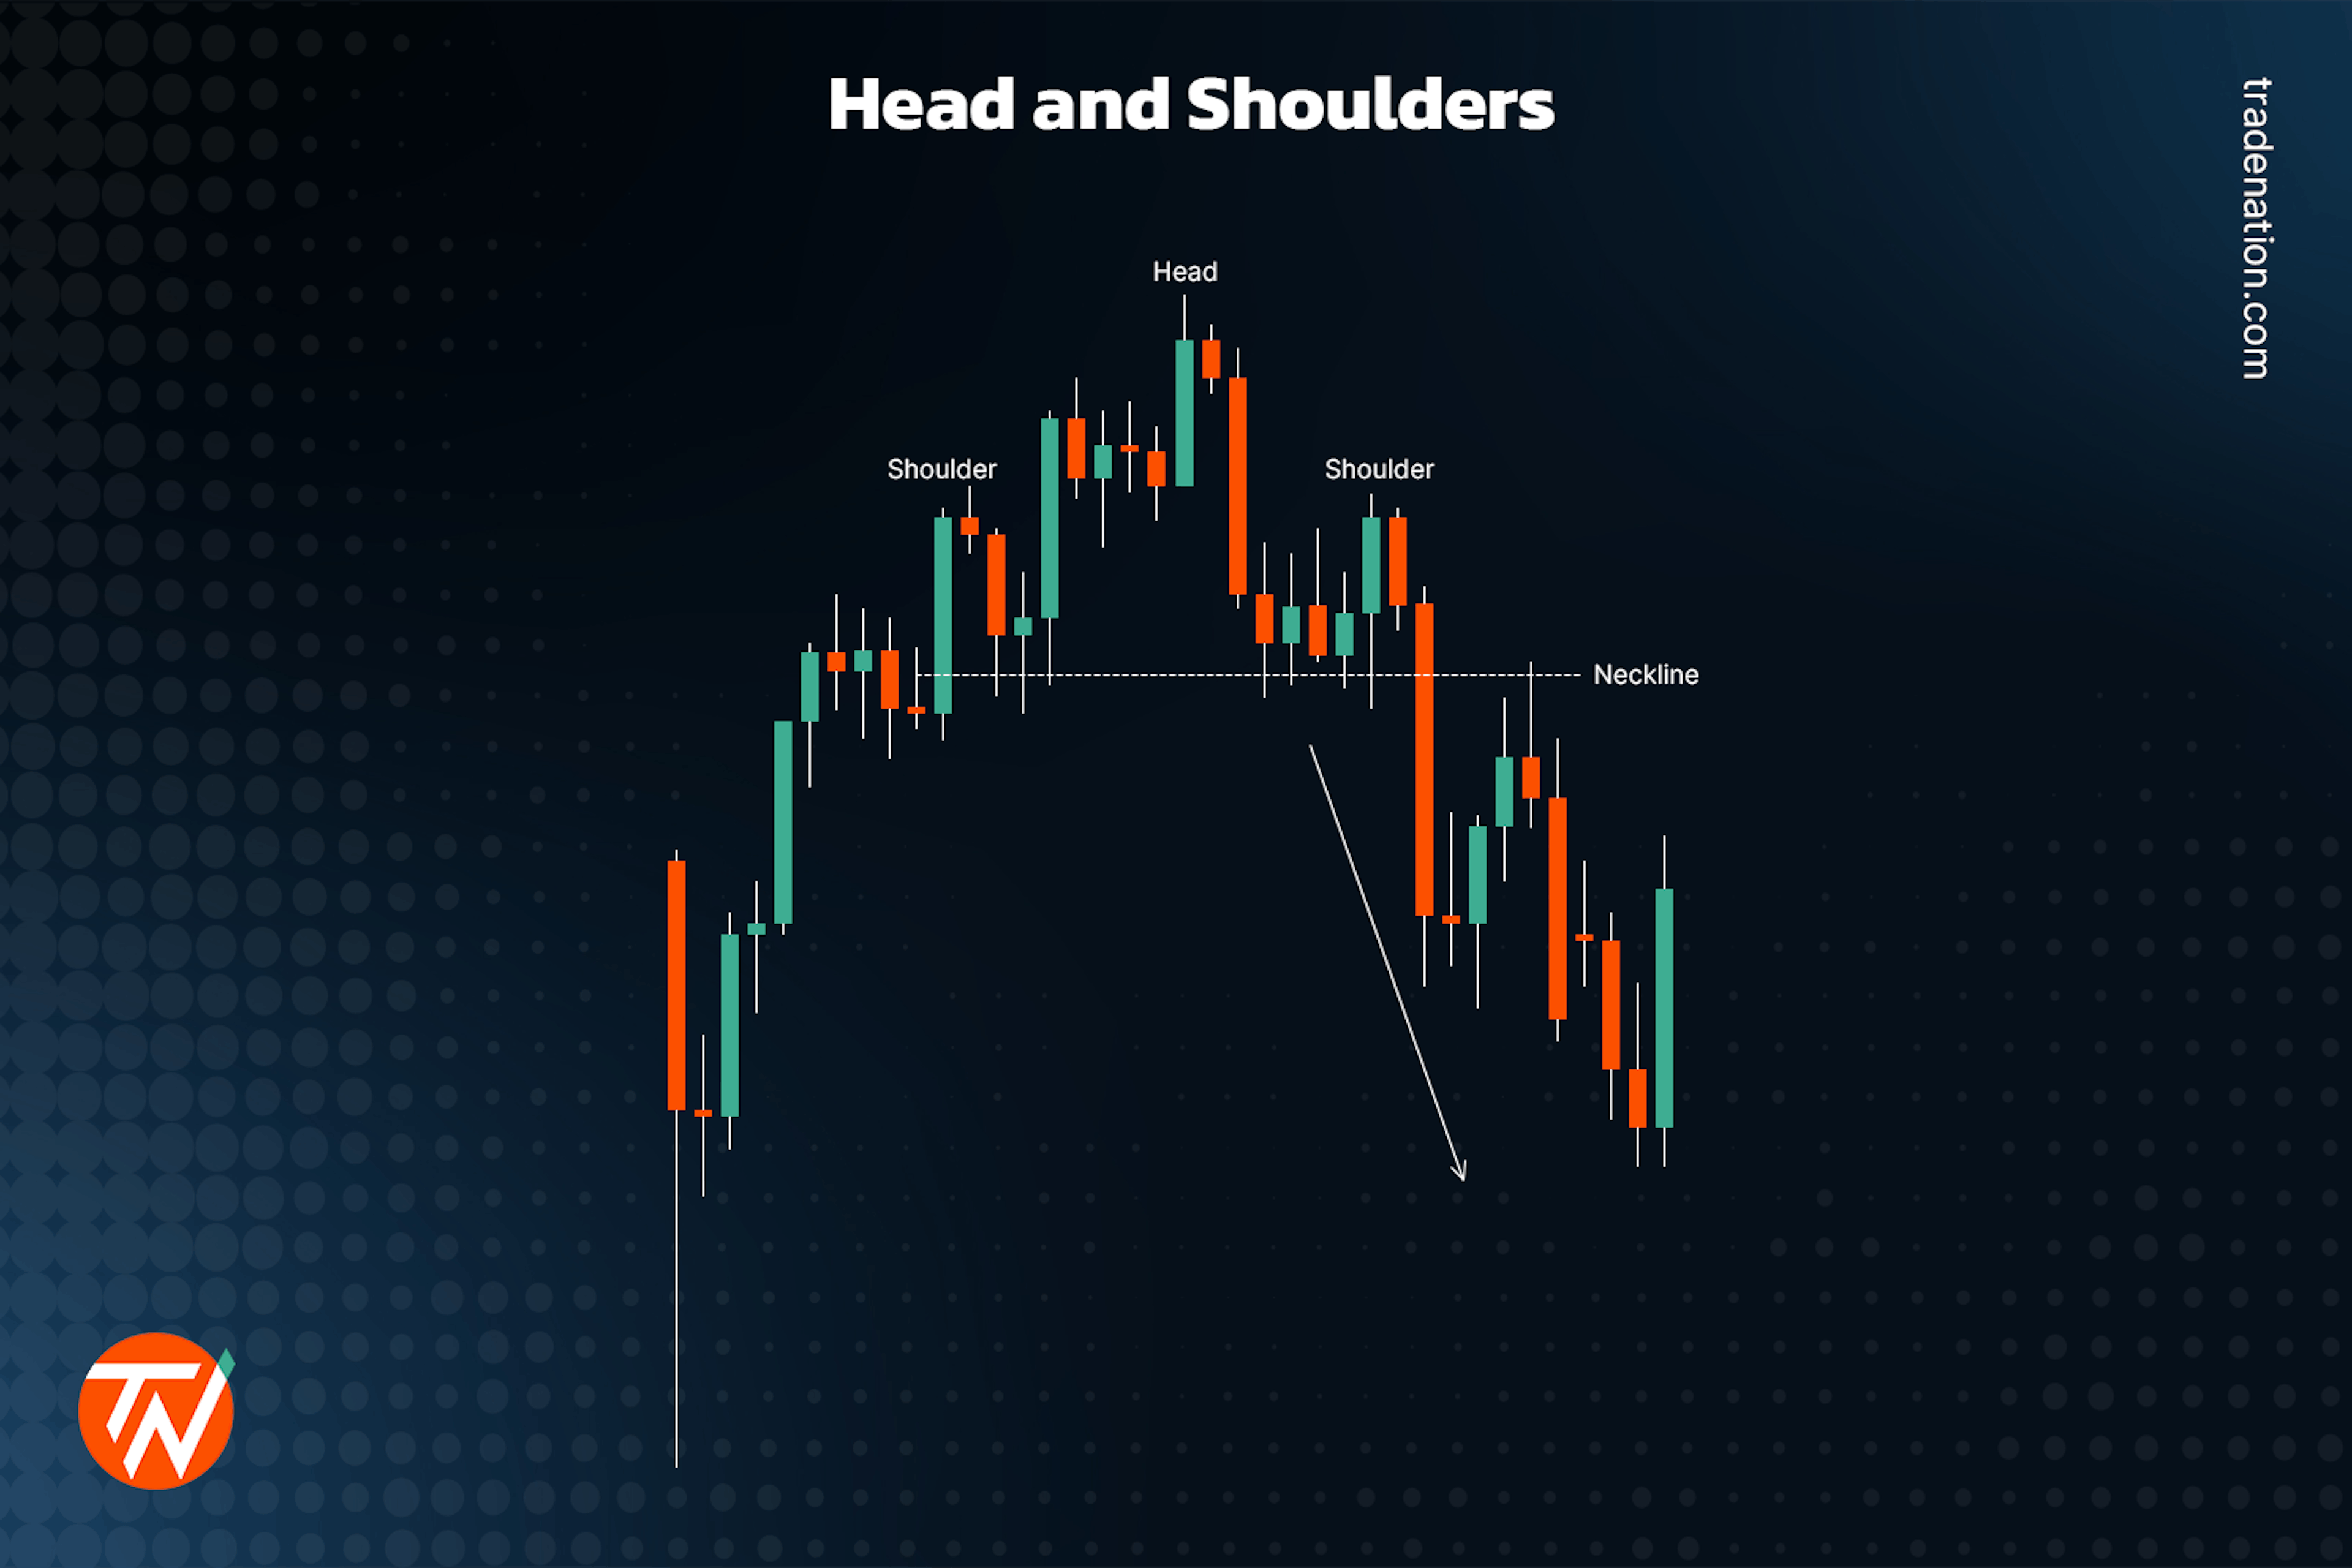 Head and shoulders in trading